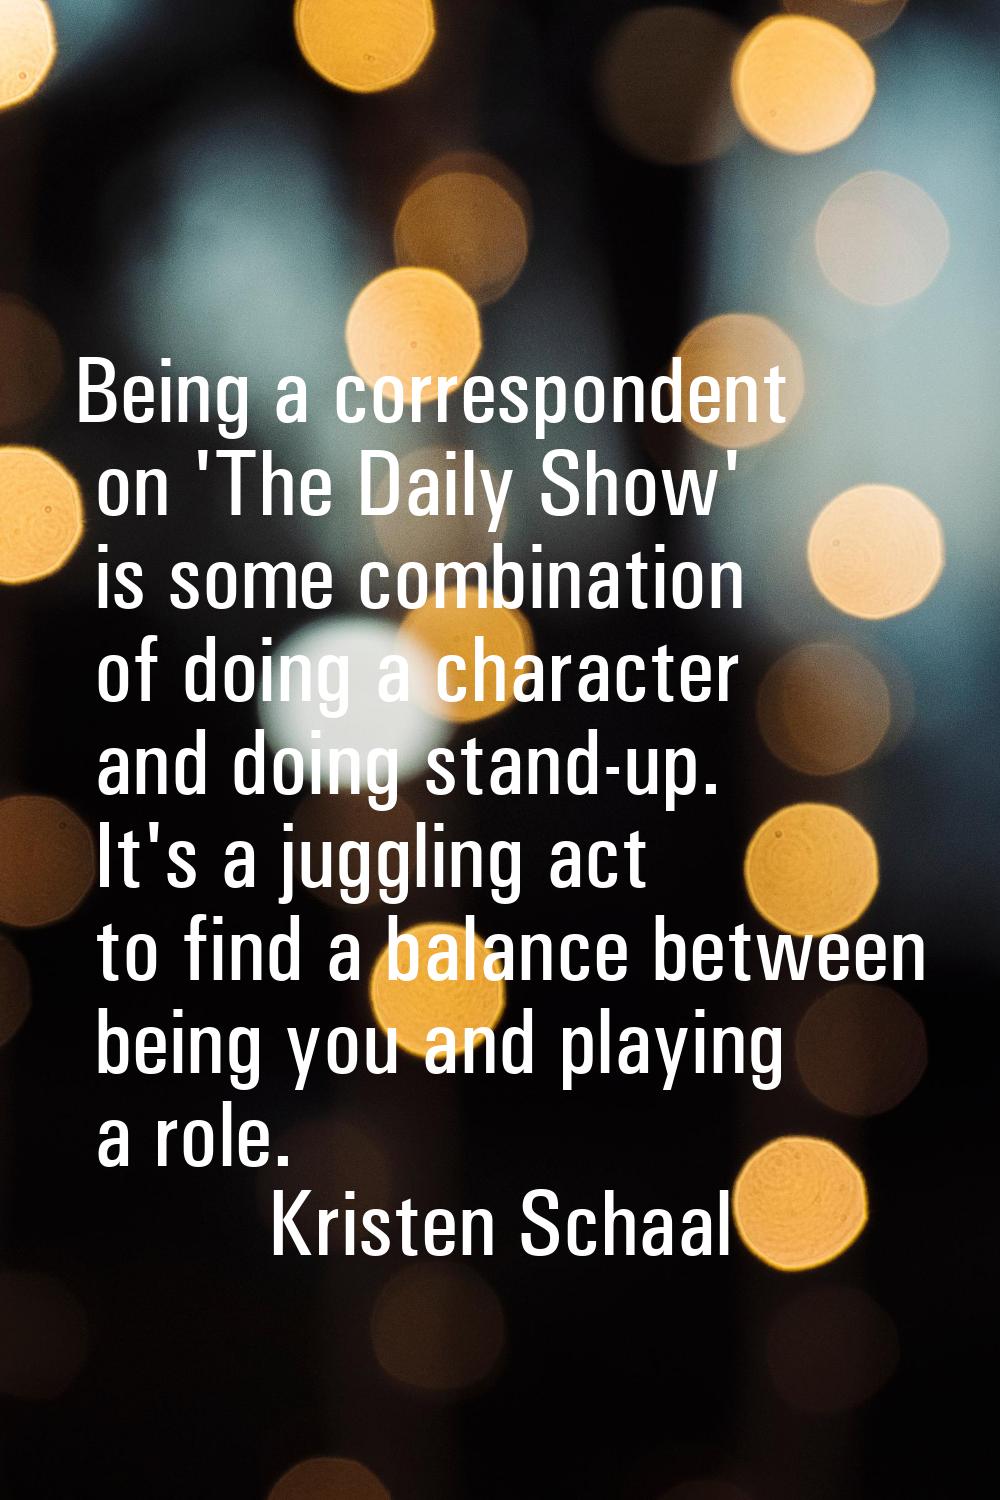 Being a correspondent on 'The Daily Show' is some combination of doing a character and doing stand-